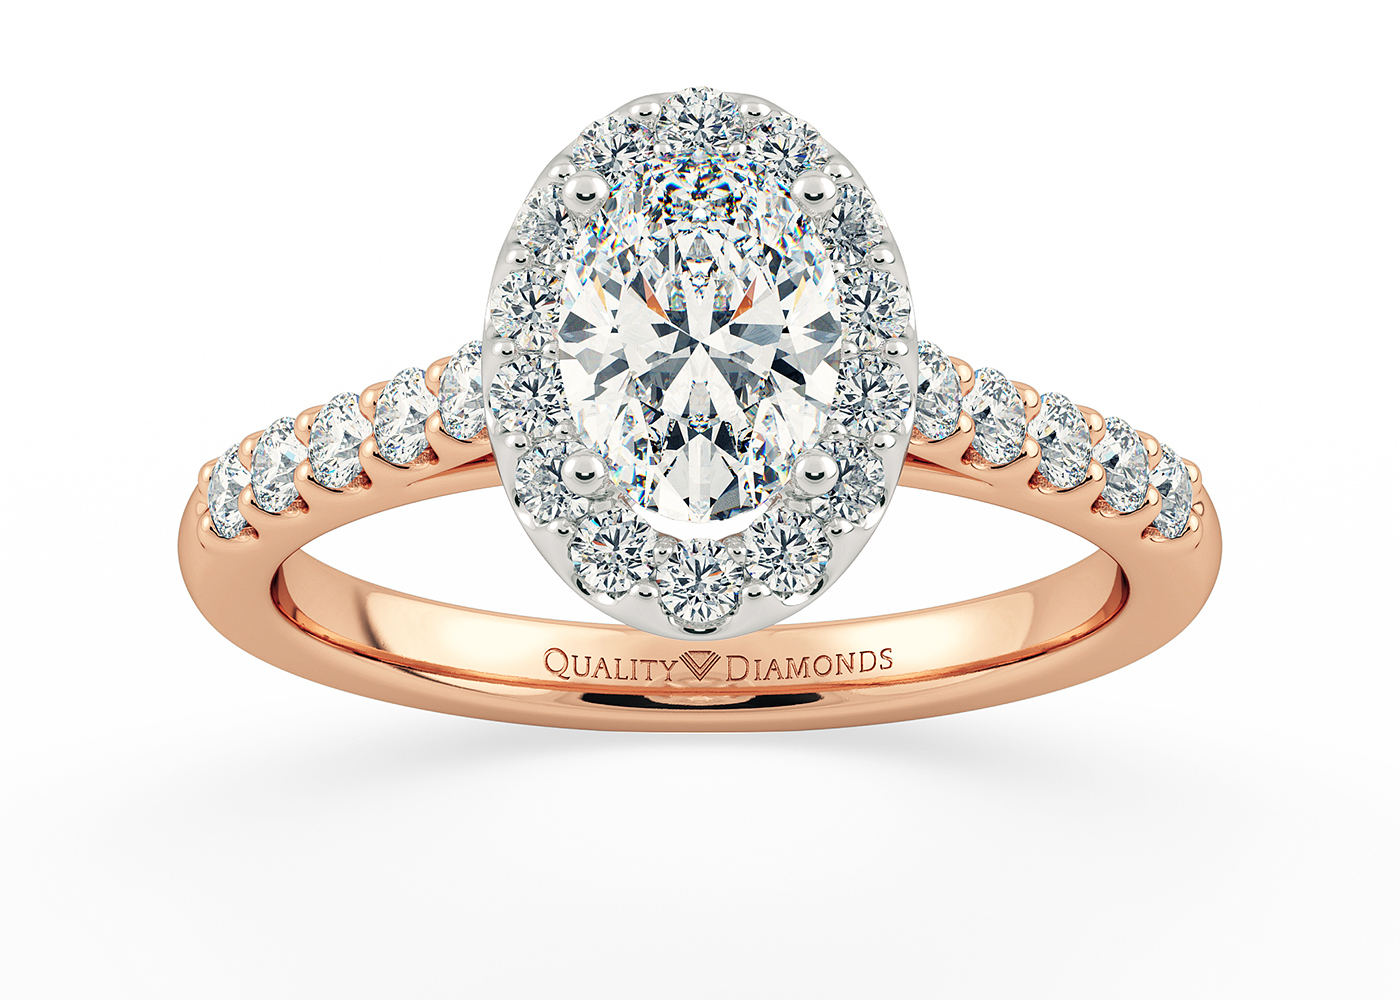 Two Carat Halo Oval Diamond Ring in 18K Rose Gold